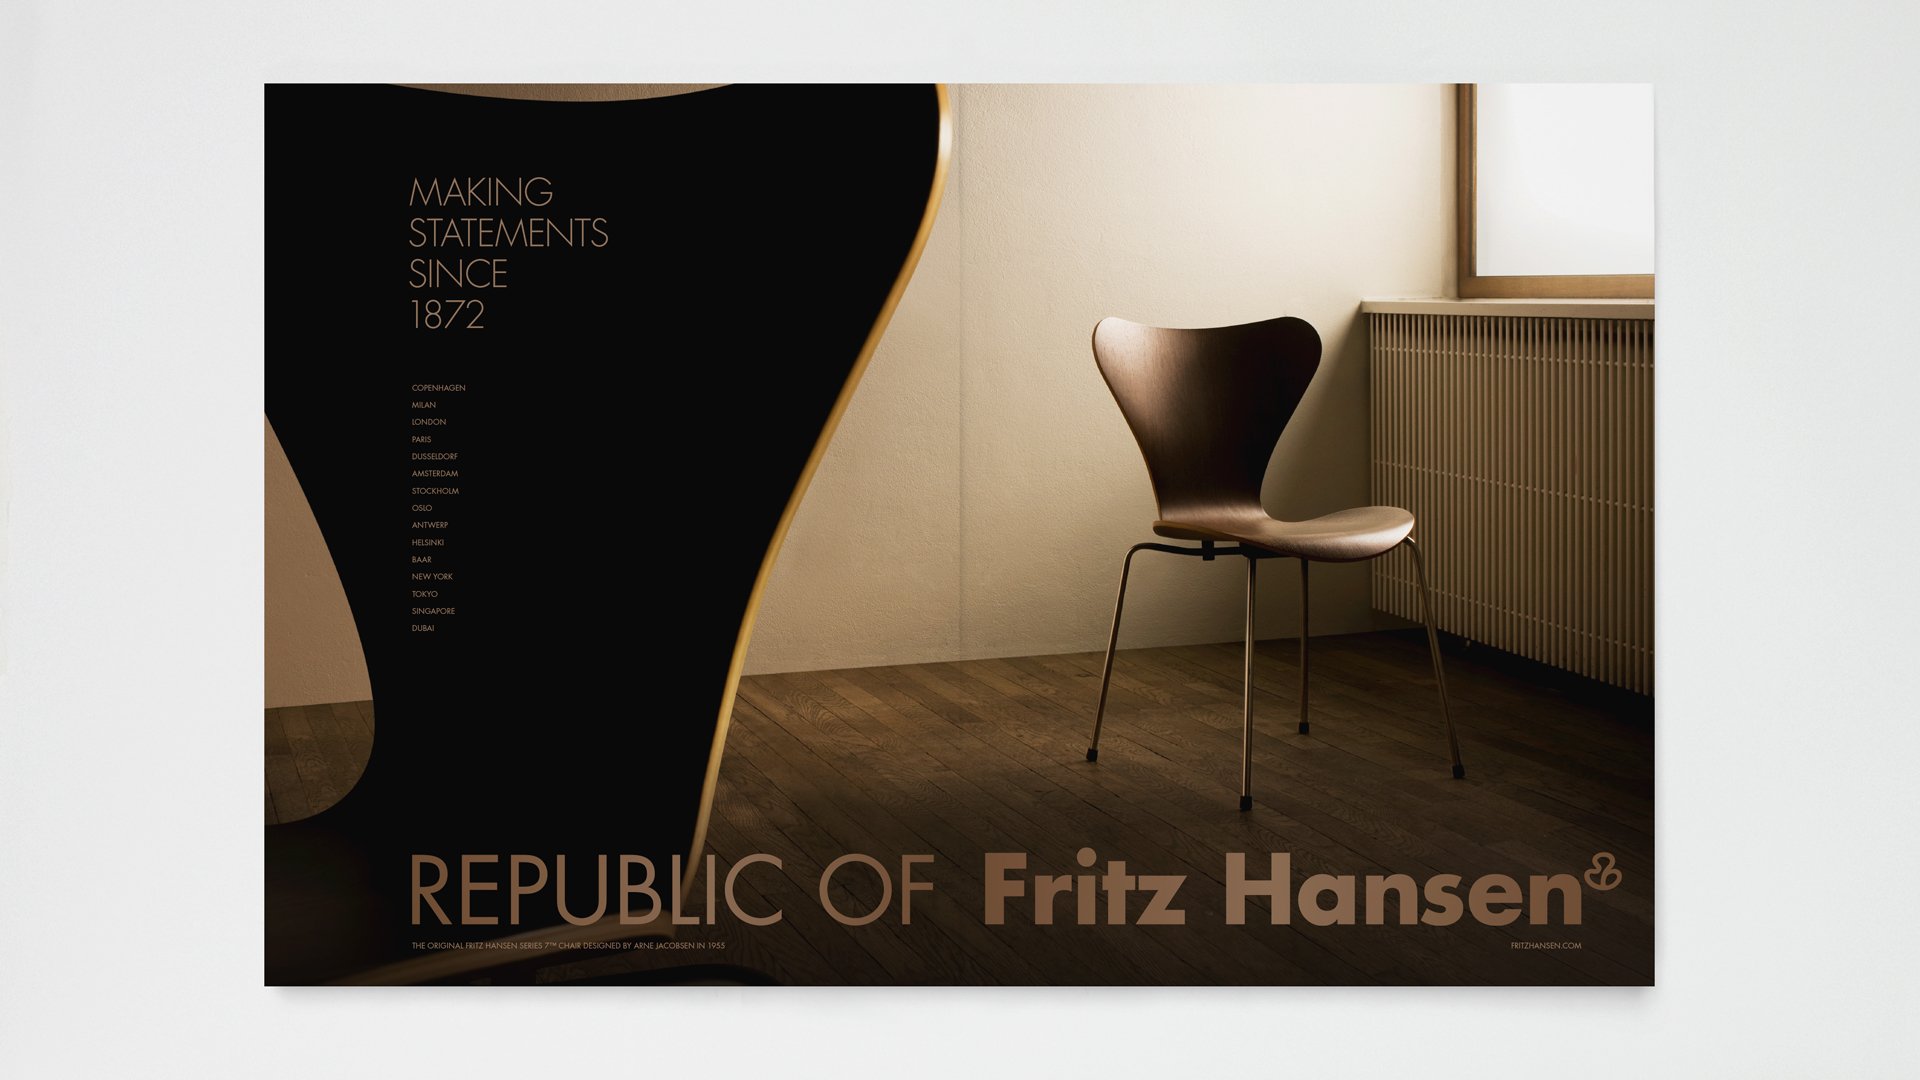 Image of the 7 chair with Fritz Hansen logo. Made by LOOP Associates